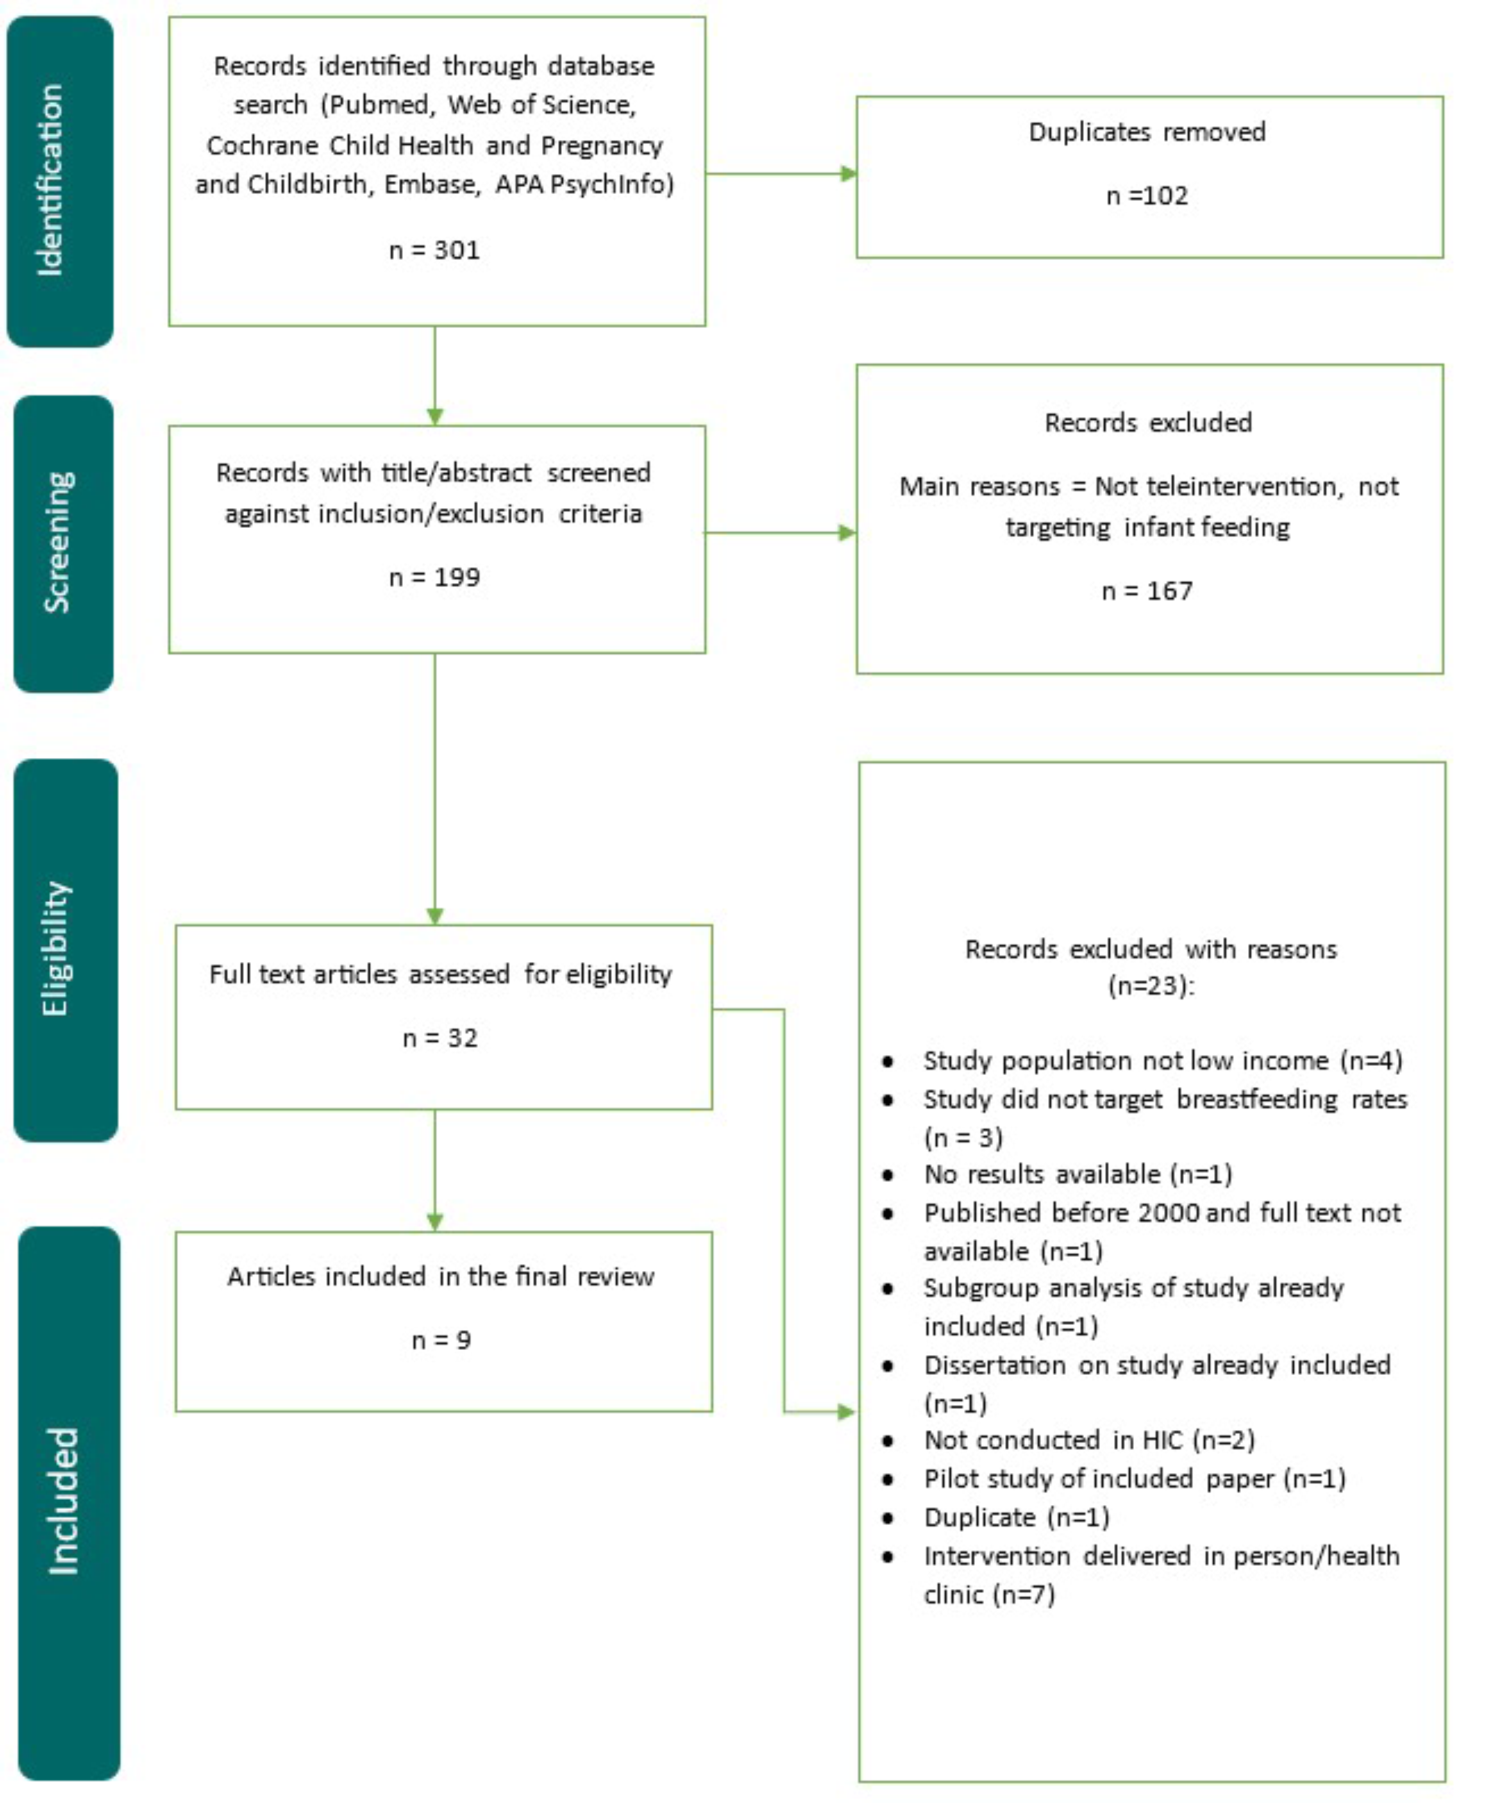 Teleintervention’s effects on breastfeeding in low-income women in high income countries: a systematic review and meta-analysis